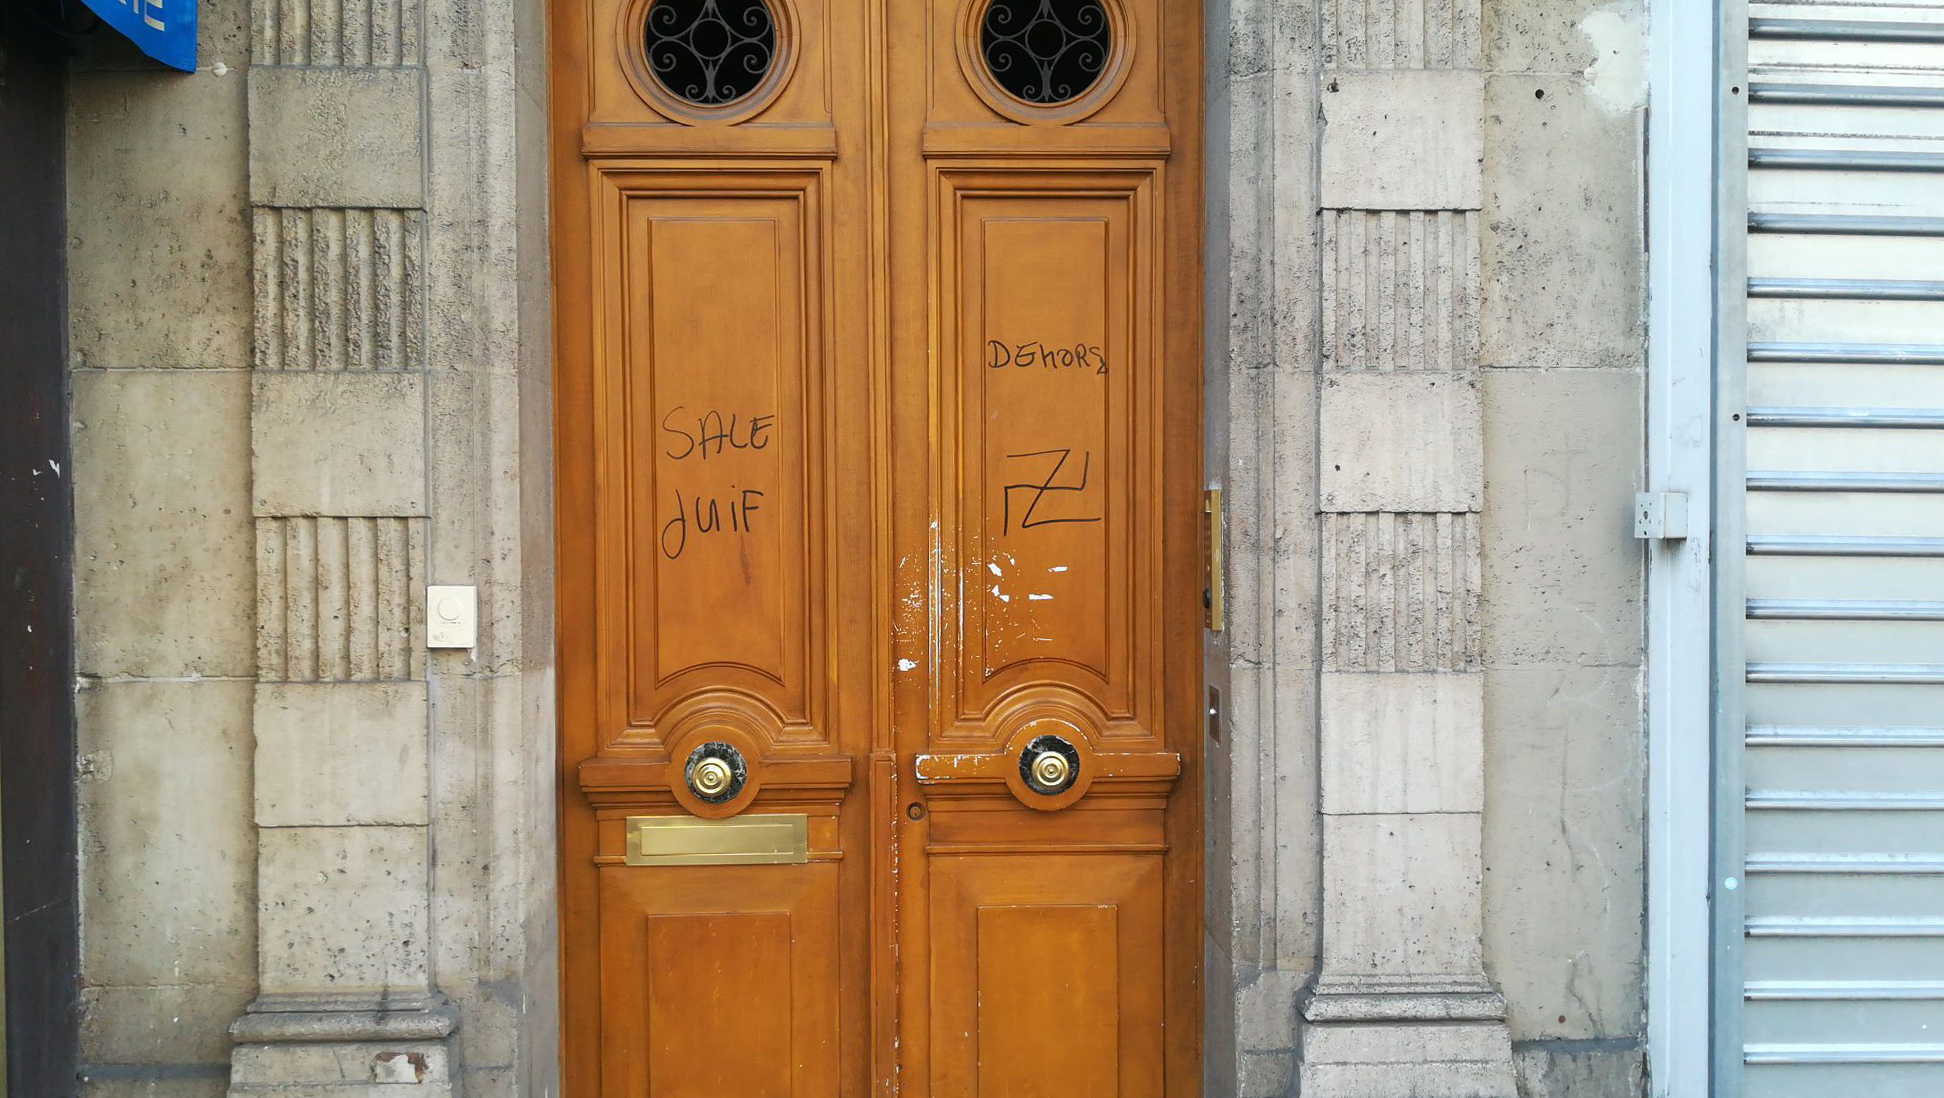 A picture taken on February 21, 2019 in the rue d'Alesia in the 14th arrondissement of Paris shows anti-Semitic tags reading "dirty Jew, get out" and a swastika tagged on a door. (ALEXANDRE HIELARD/AFP/Getty Images)